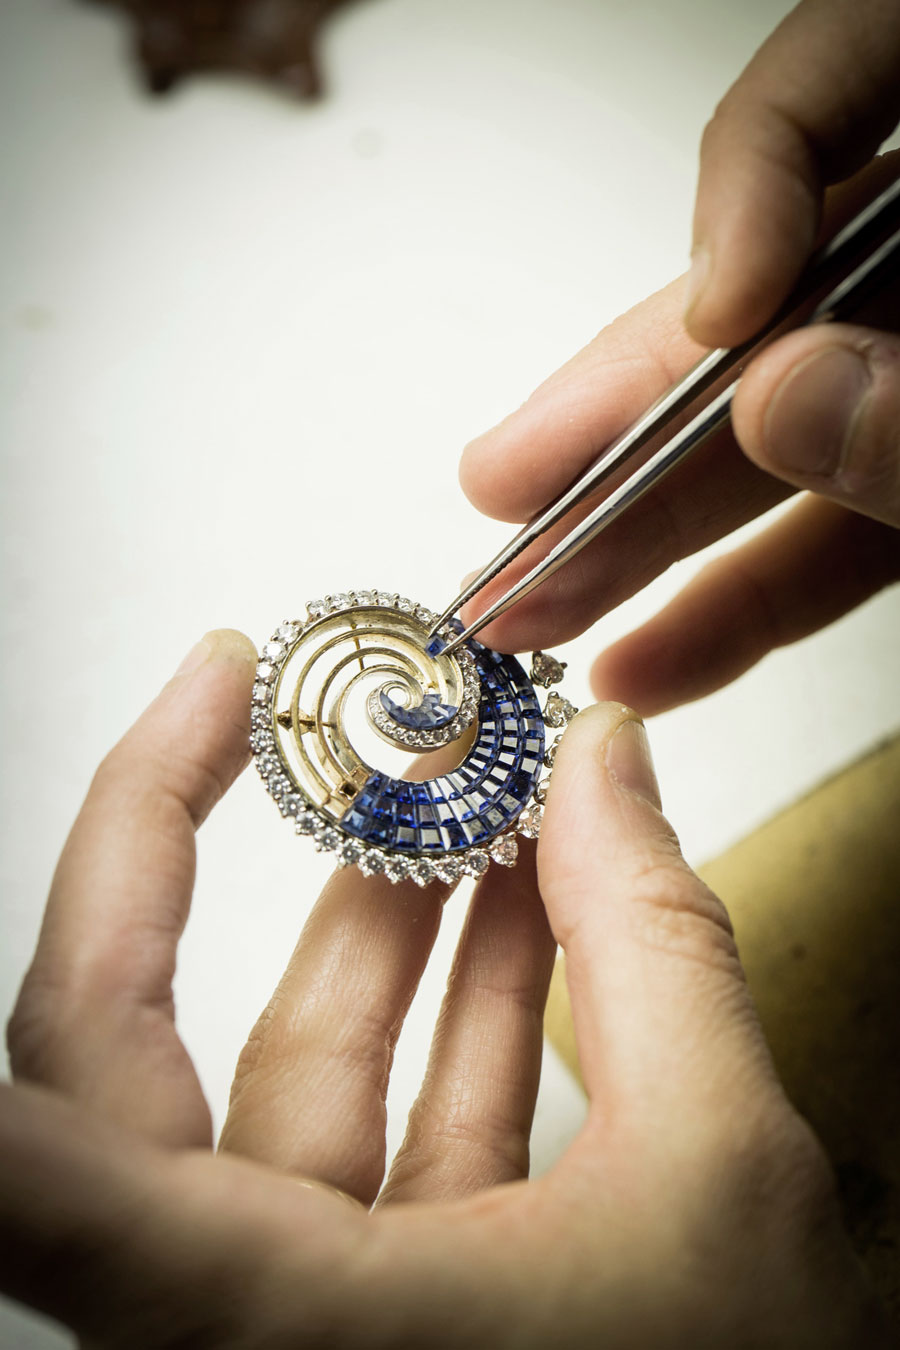 Mystery Set™ work: inserting the sapphire into the structure of the Van Cleef &amp; Arpels Vagues Mystérieuses clip, "Seven Seas" high jewellery collection. Photo © Van Cleef &amp; Arpels.